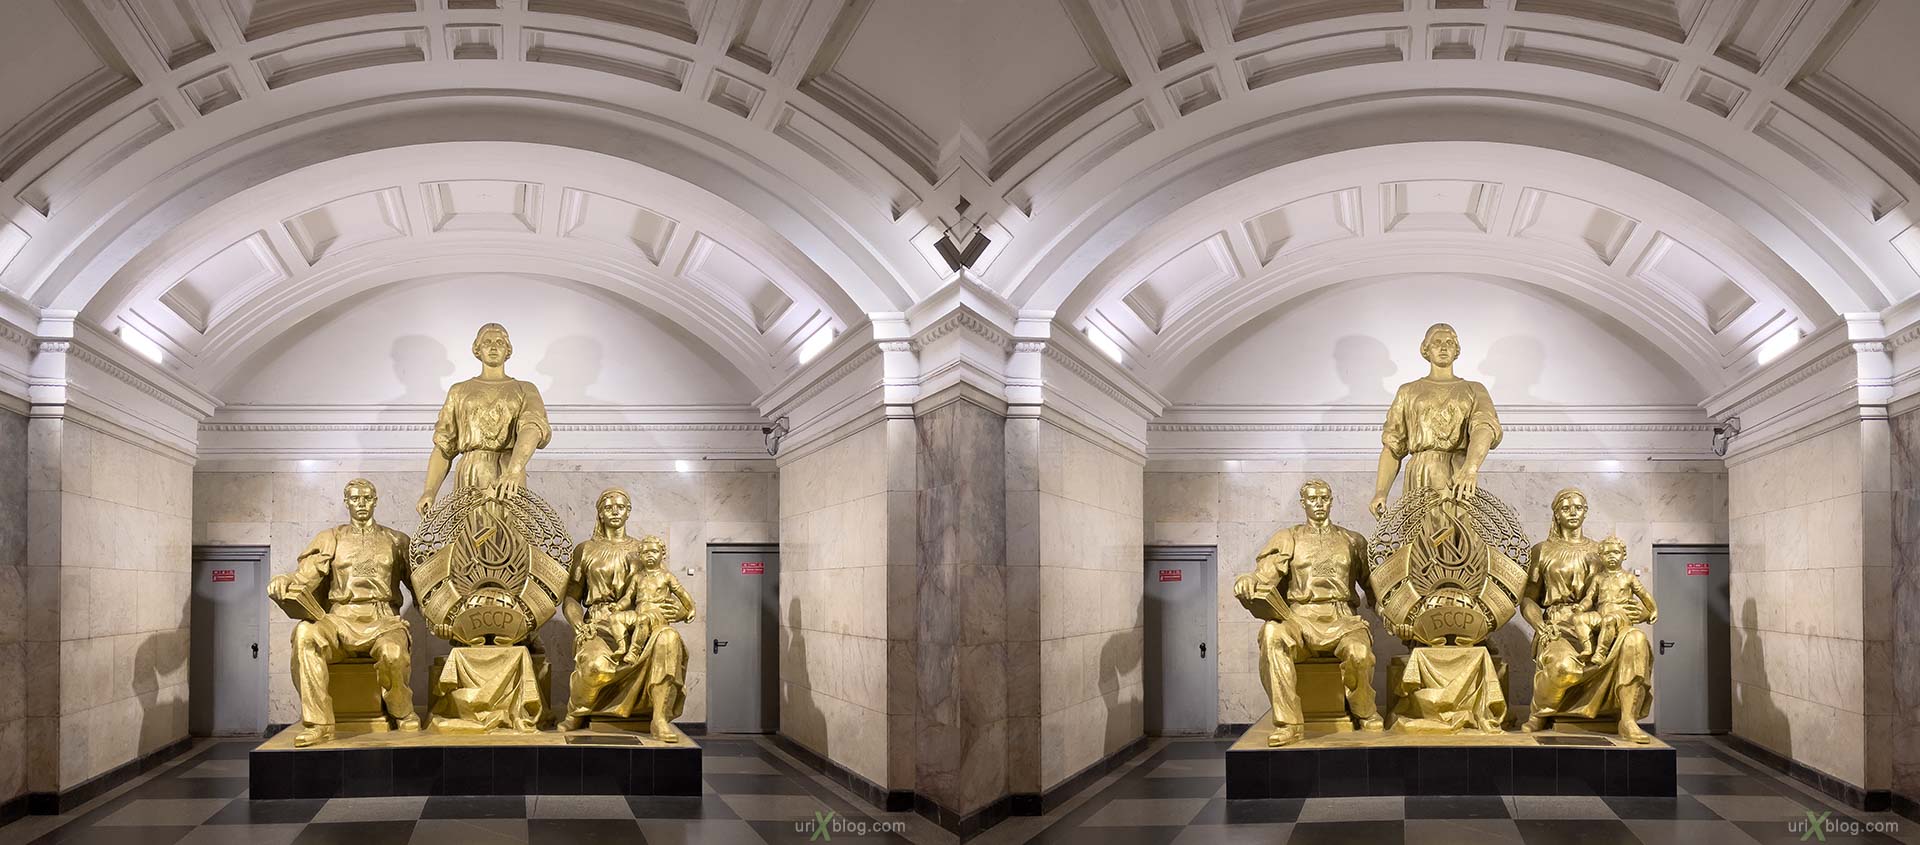 Soviet Belorussia, Belorusskaia, monument, statue, worker, Moscow, Russia, metro, subway, gold, 3D, stereo pair, cross-eyed, crossview, cross view stereo pair, stereoscopic